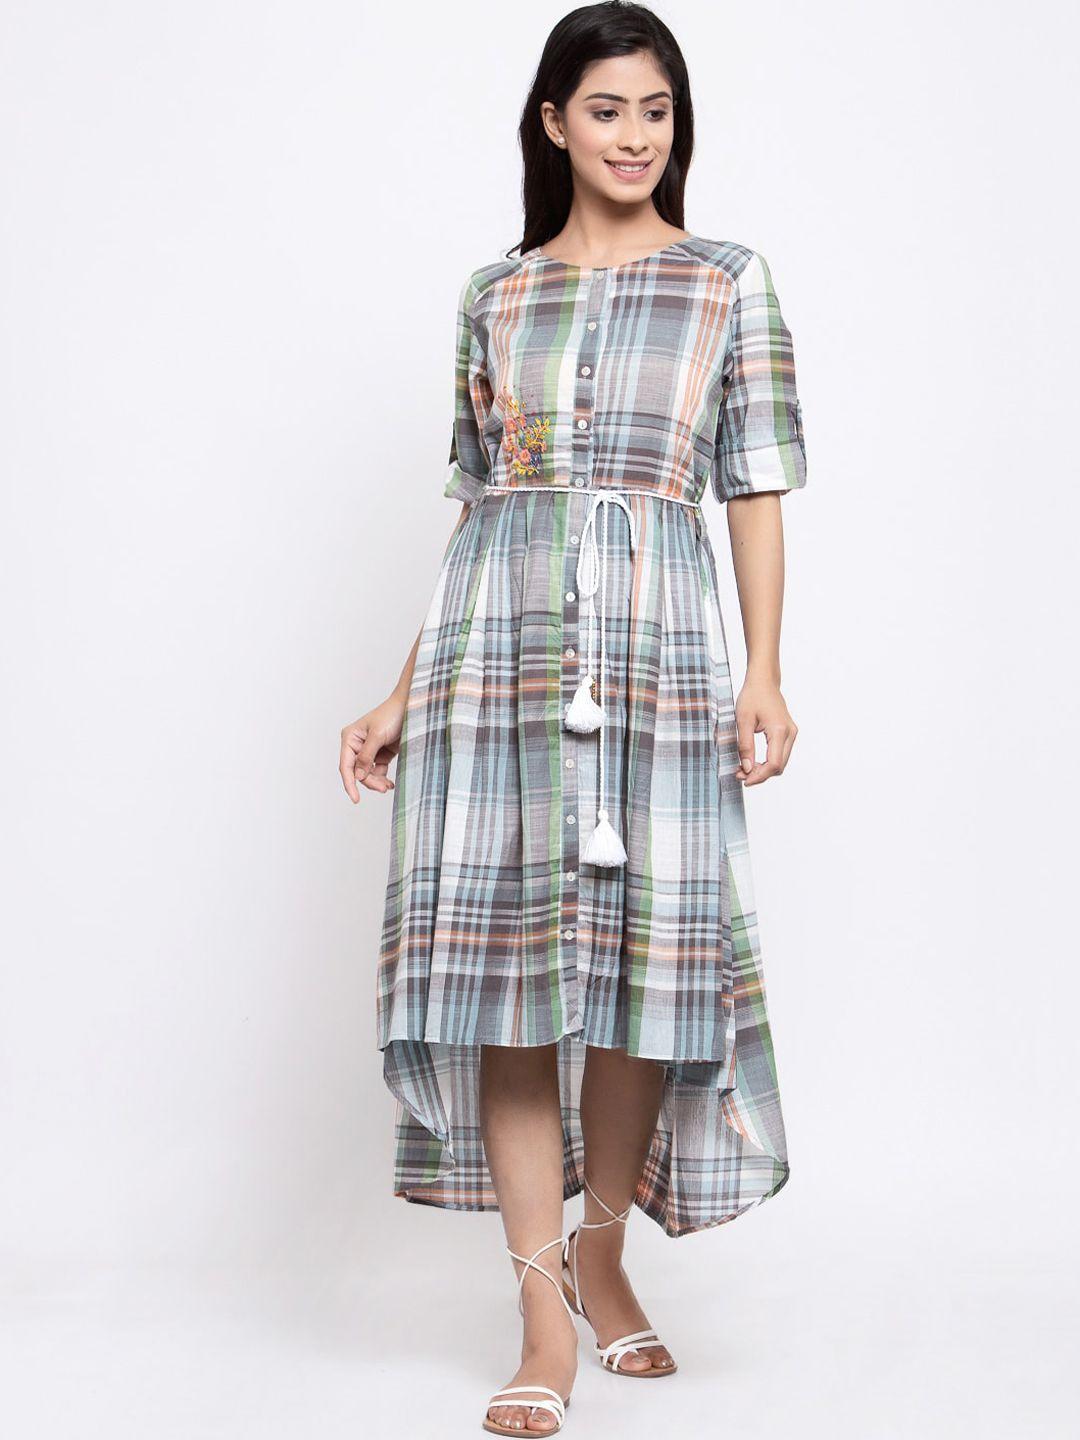 TERQUOIS Women Green Checked Cotton A-Line Dress